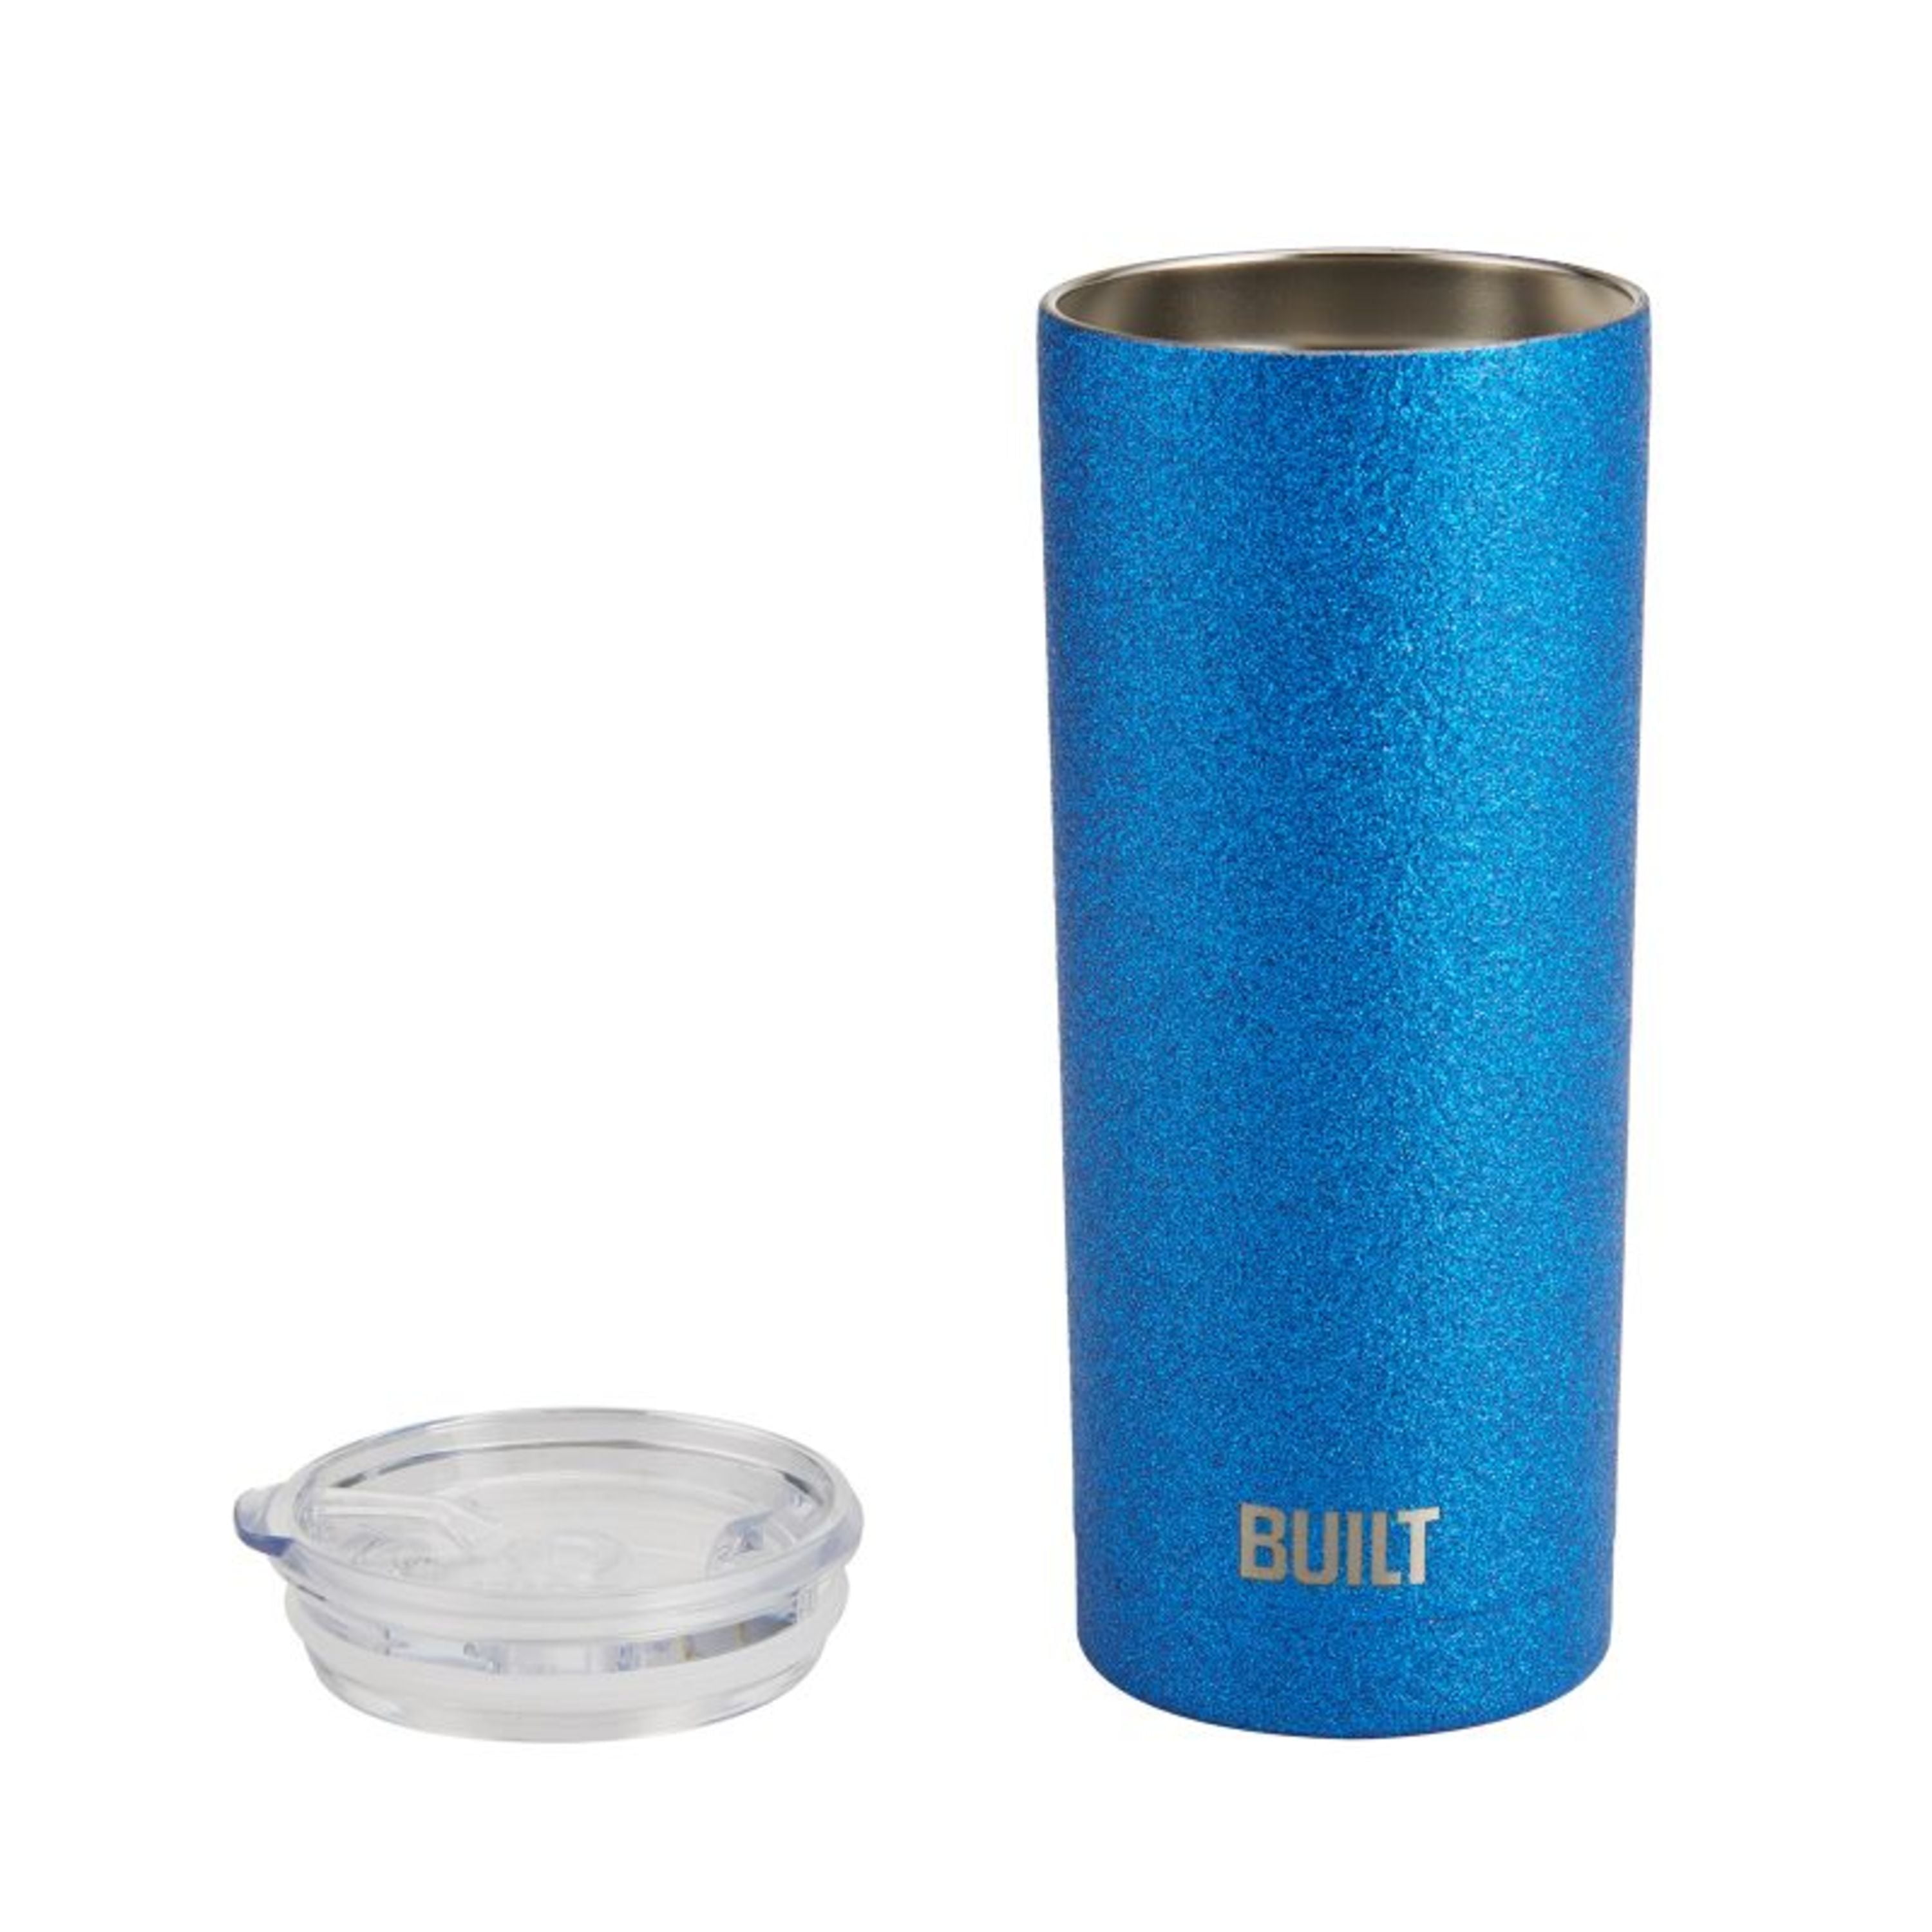 Performance Inspired Double Wall Stainless Steel Shaker – Blue